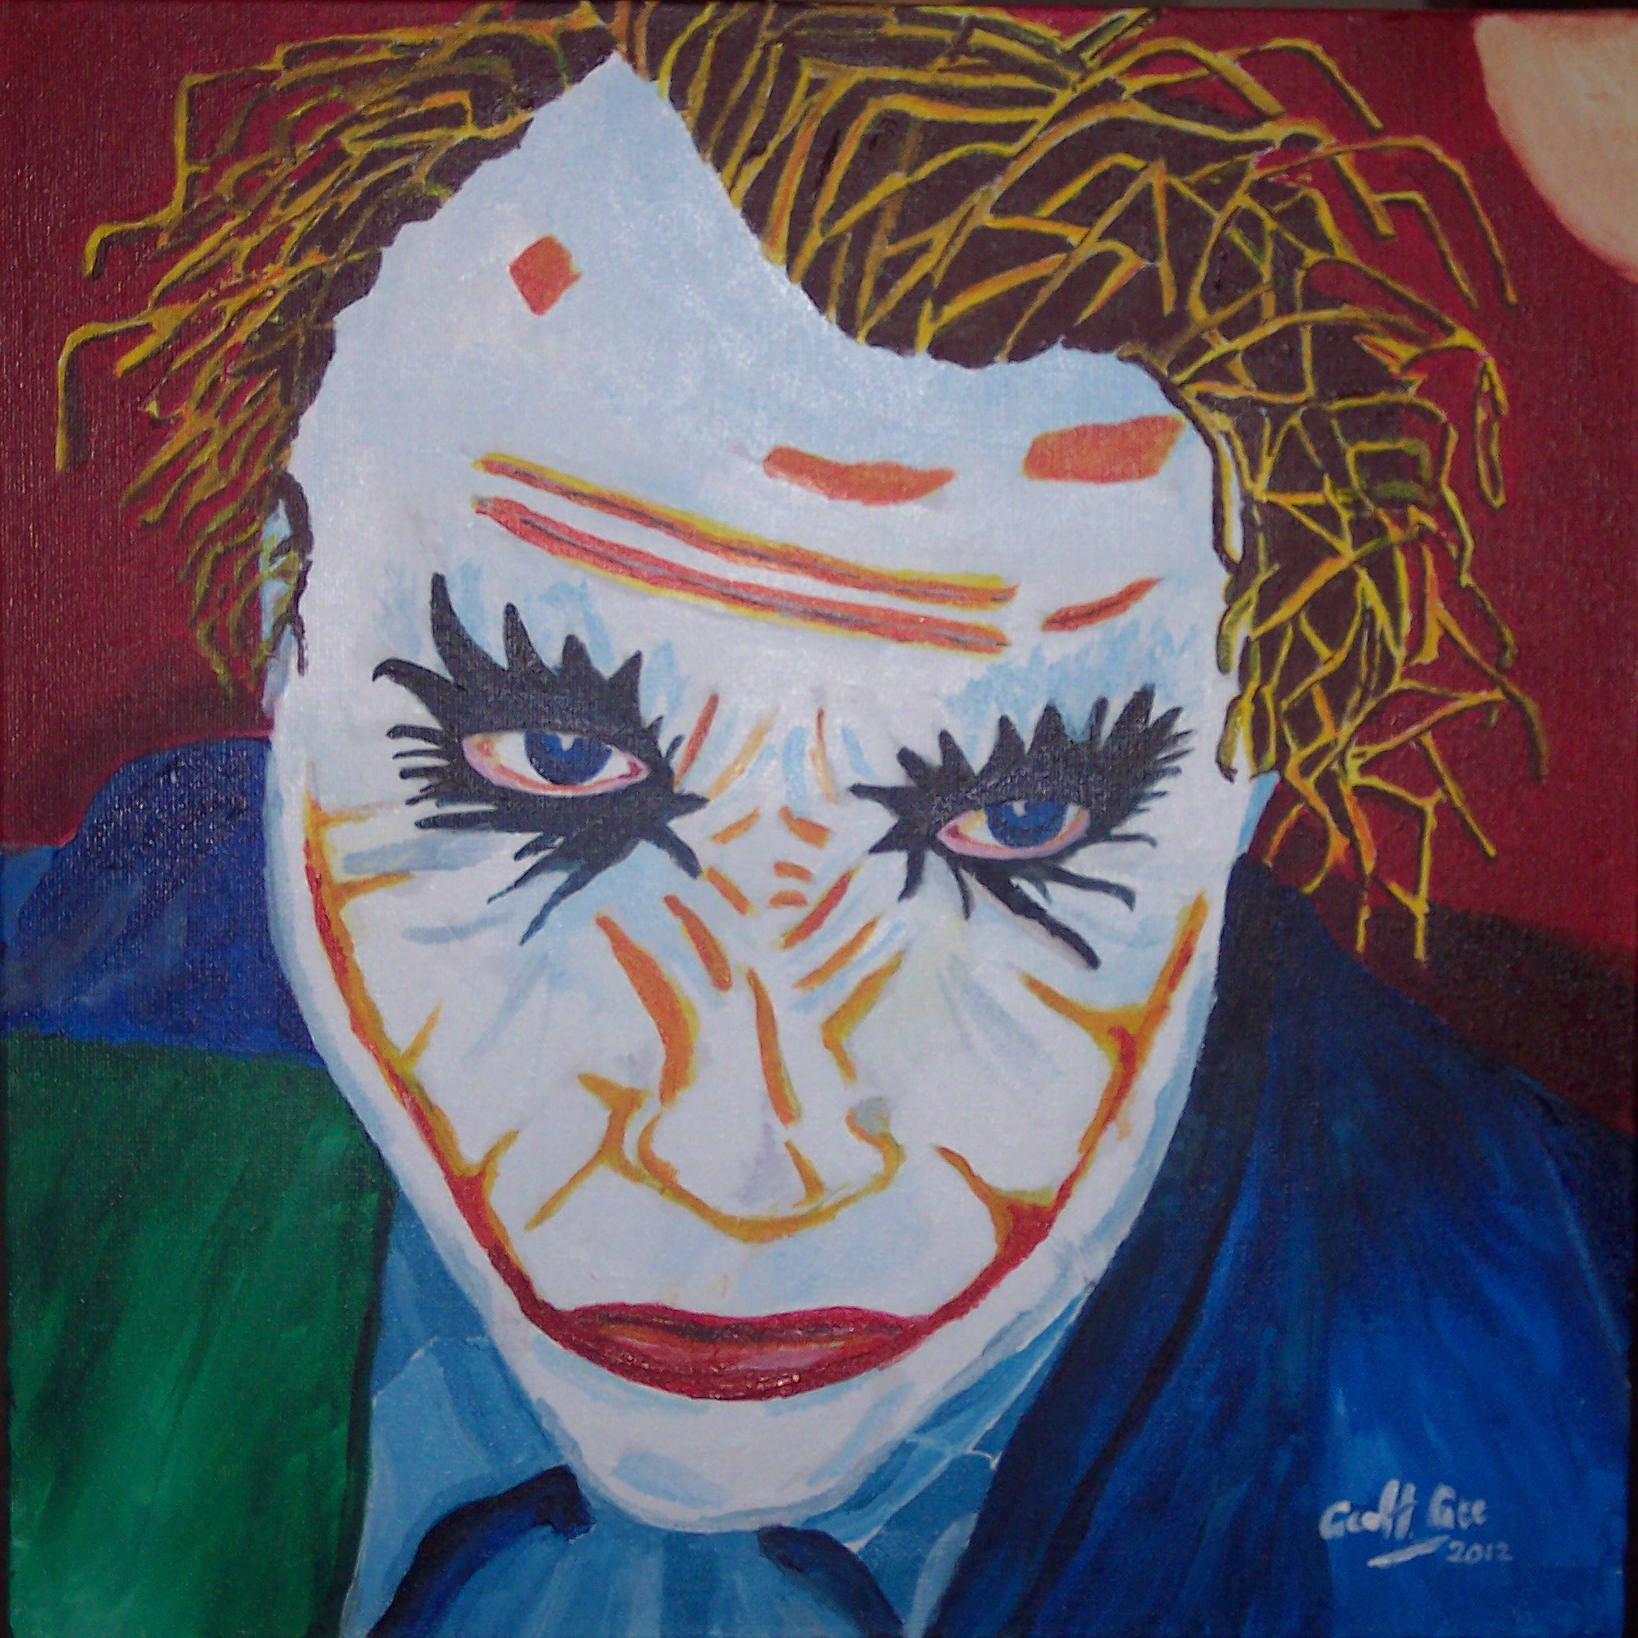 A Tribute to Heath Ledger as  "The Joker"  Acrylics  Canvas  Picture size - 16"x16"  Price - £150